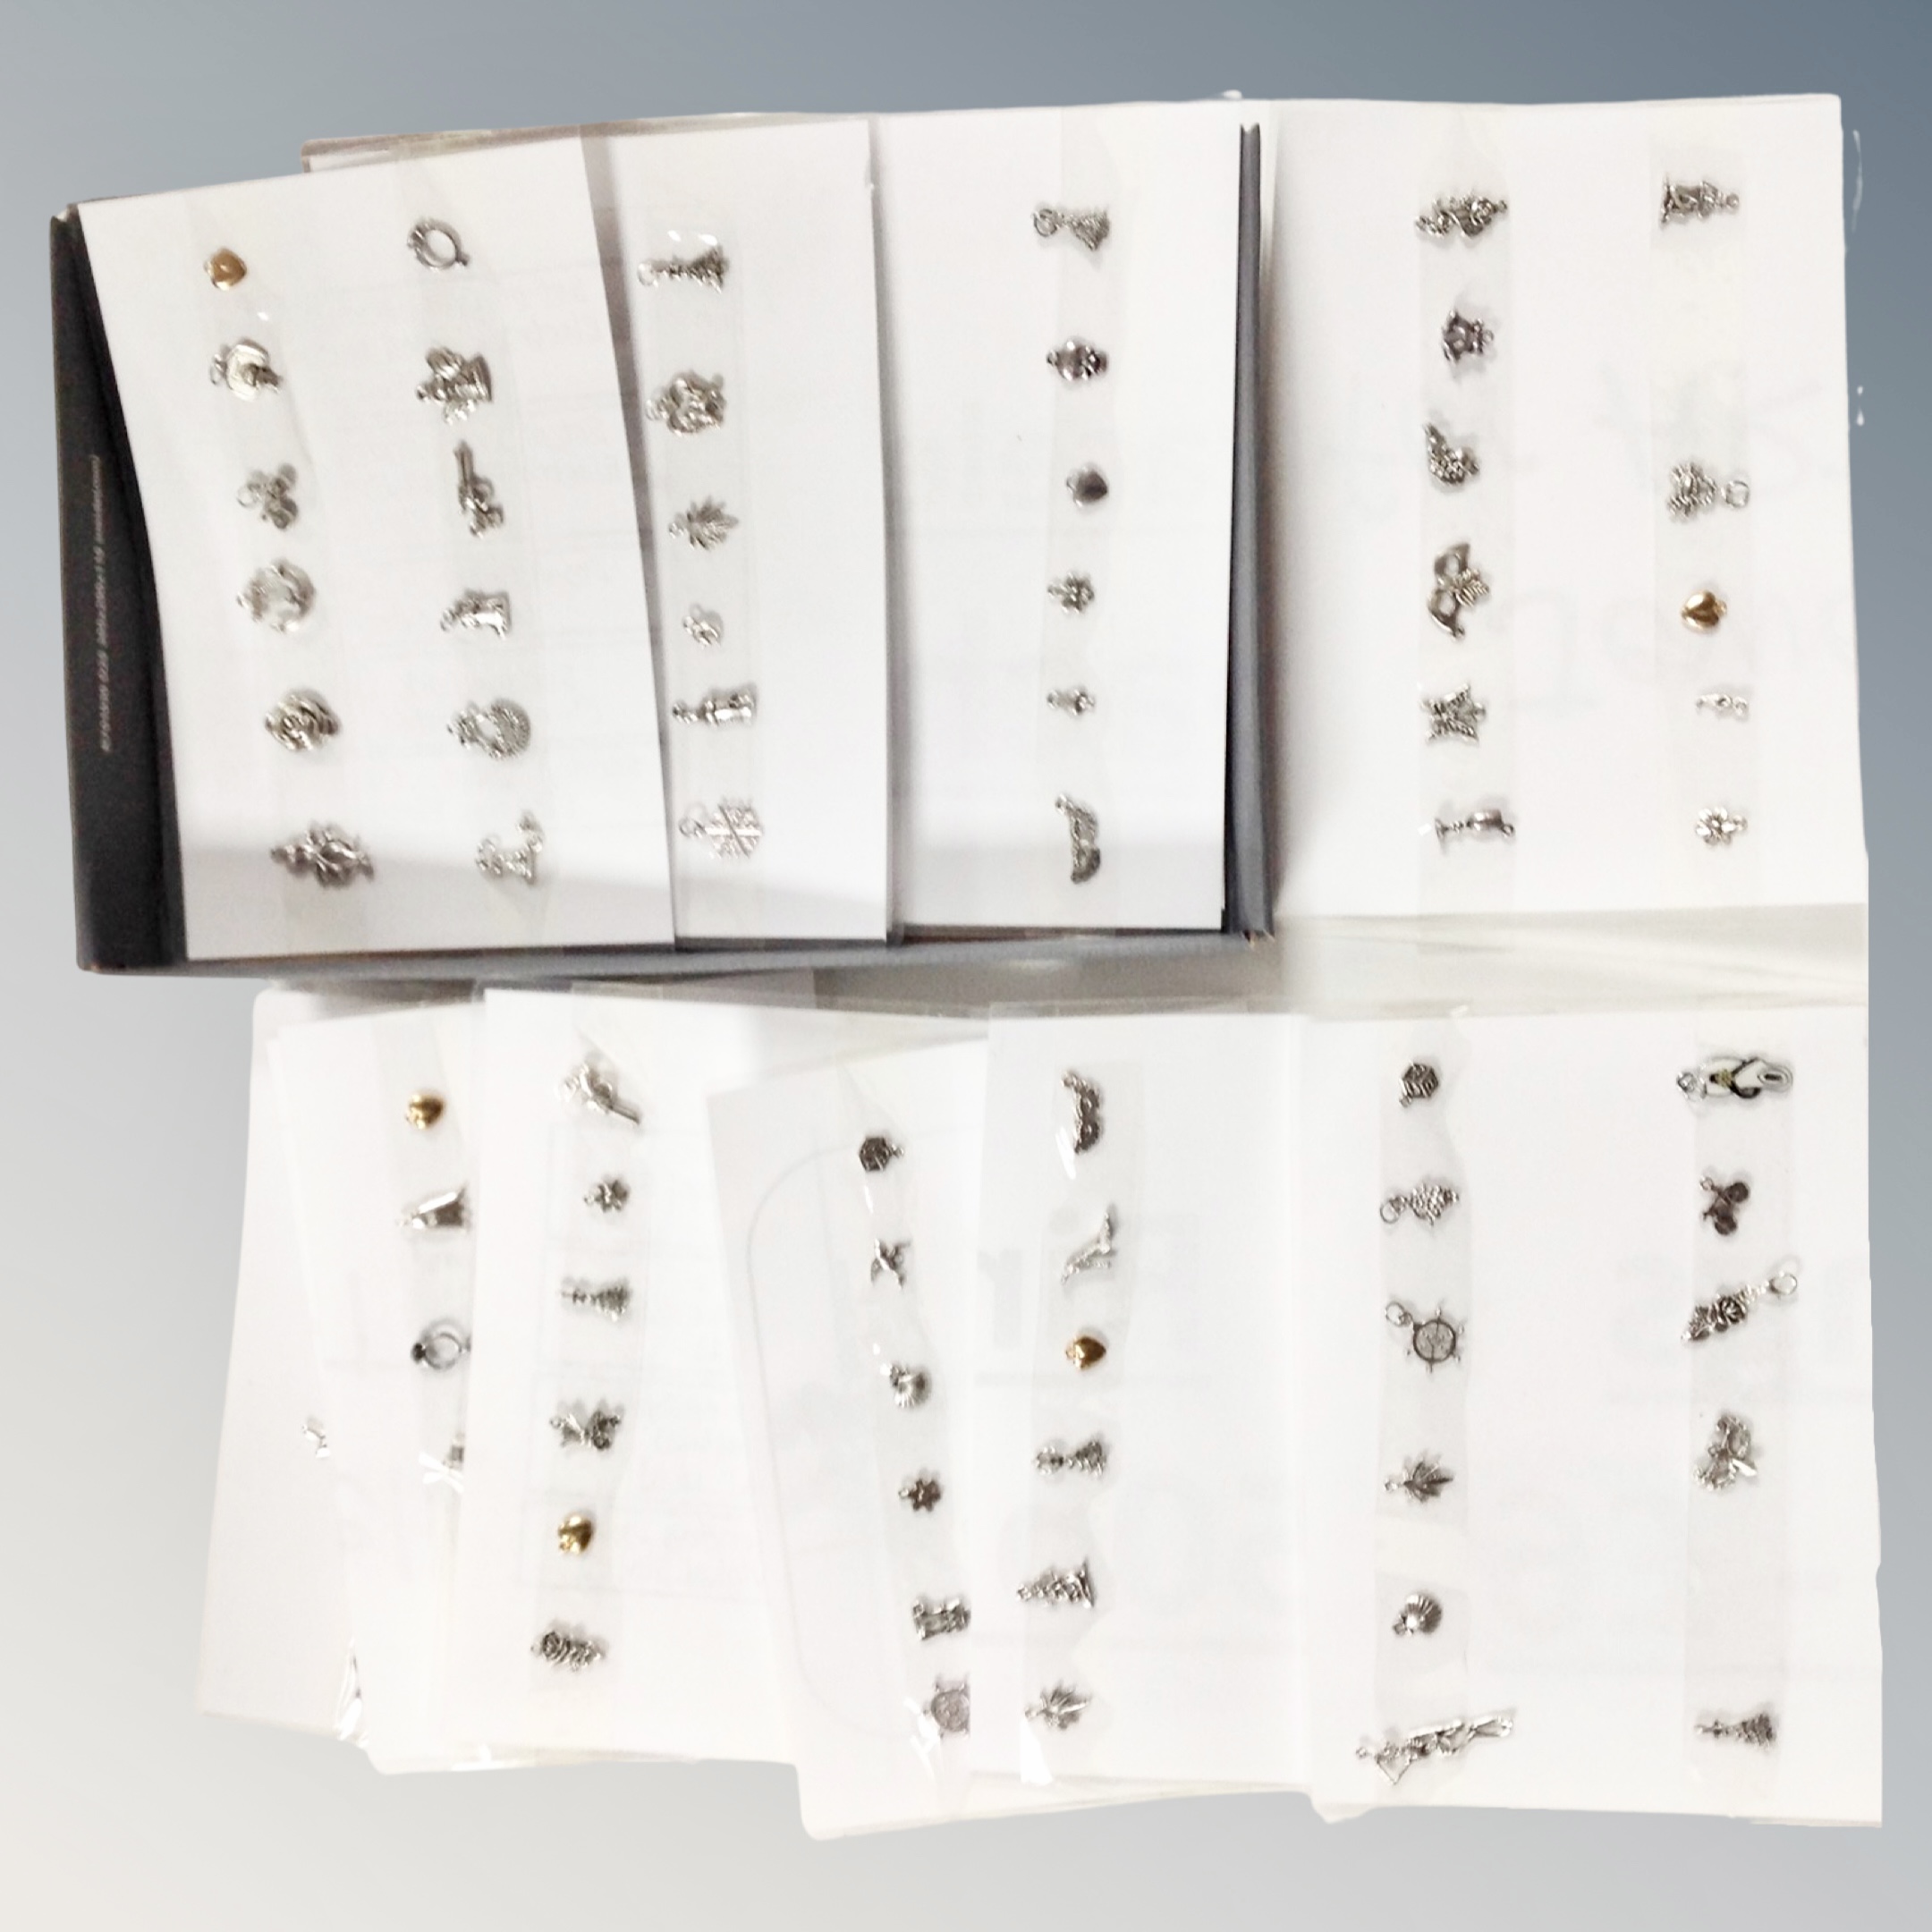 A quantity of bracelet charms mounted on card